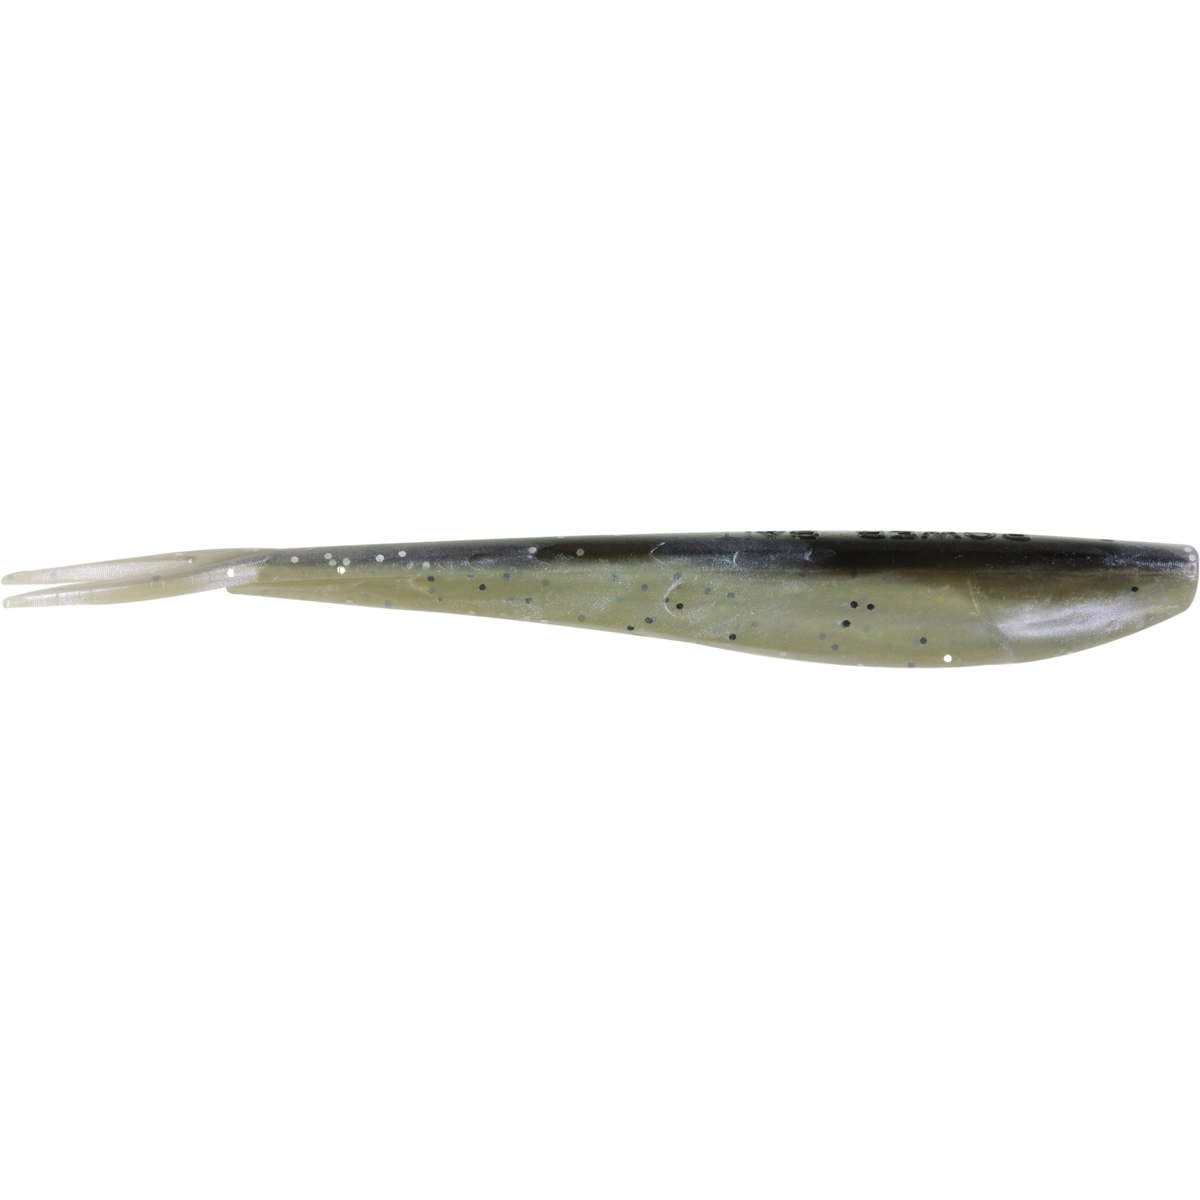 Photo of Berkley PowerBait Minnow for sale at United Tackle Shops.